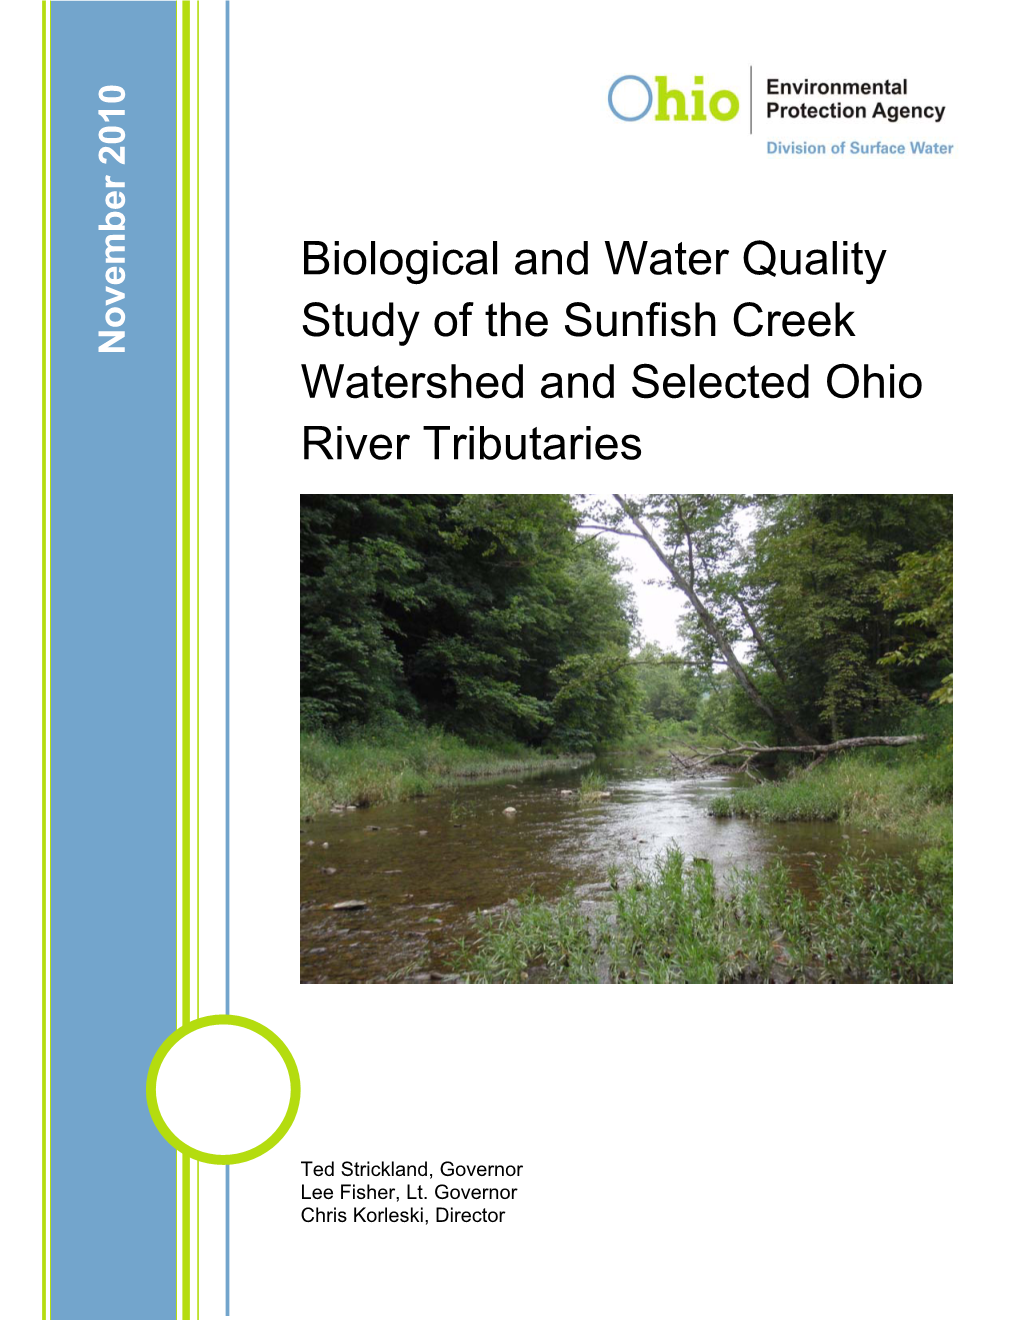 Biological and Water Quality Study of the Sunfish Creek November 2010 Watershed and Selected Ohio River Tributaries